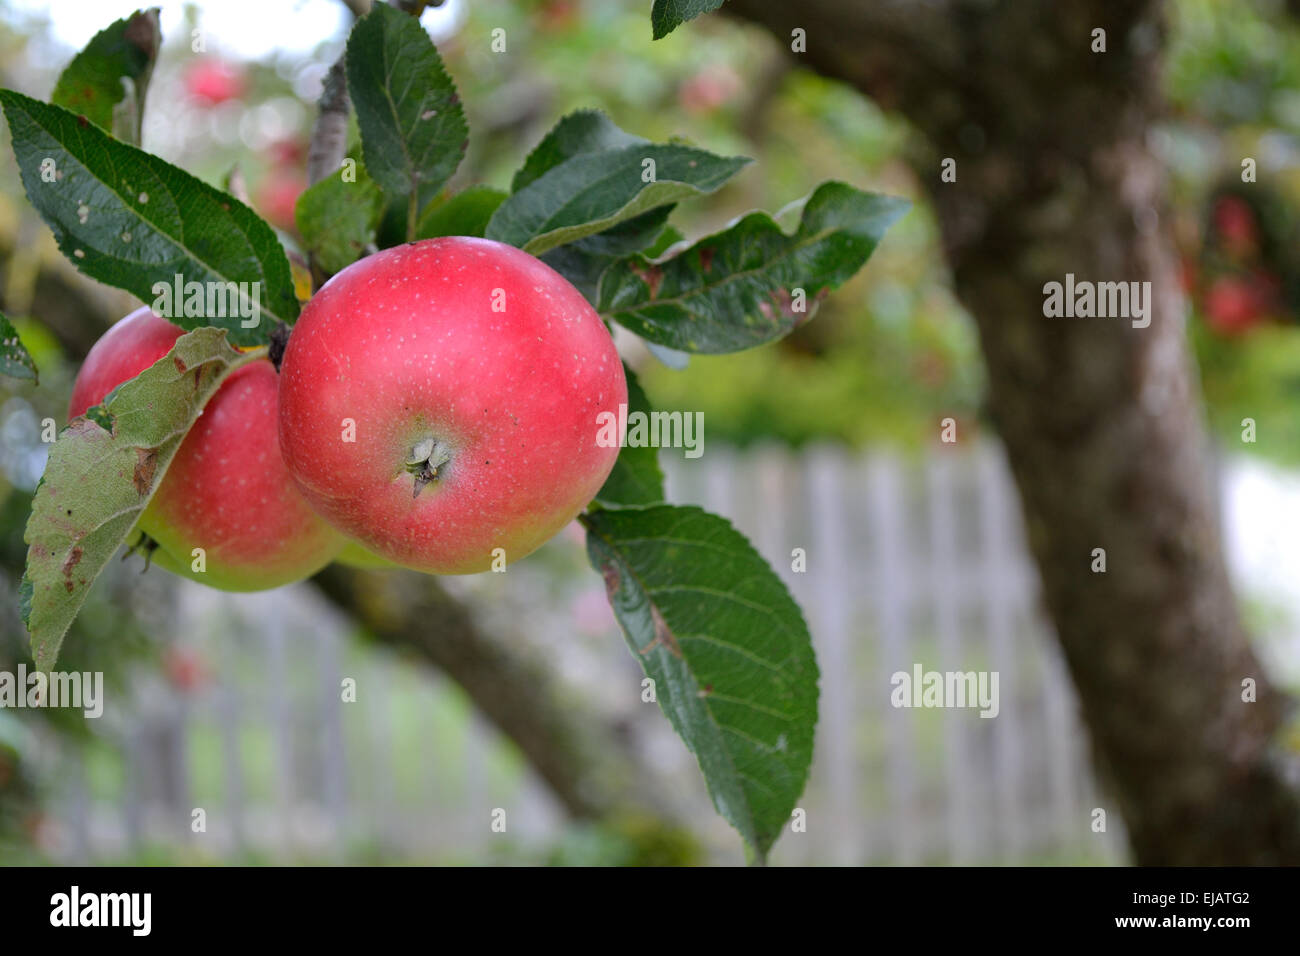 untreated apples on the tree Stock Photo